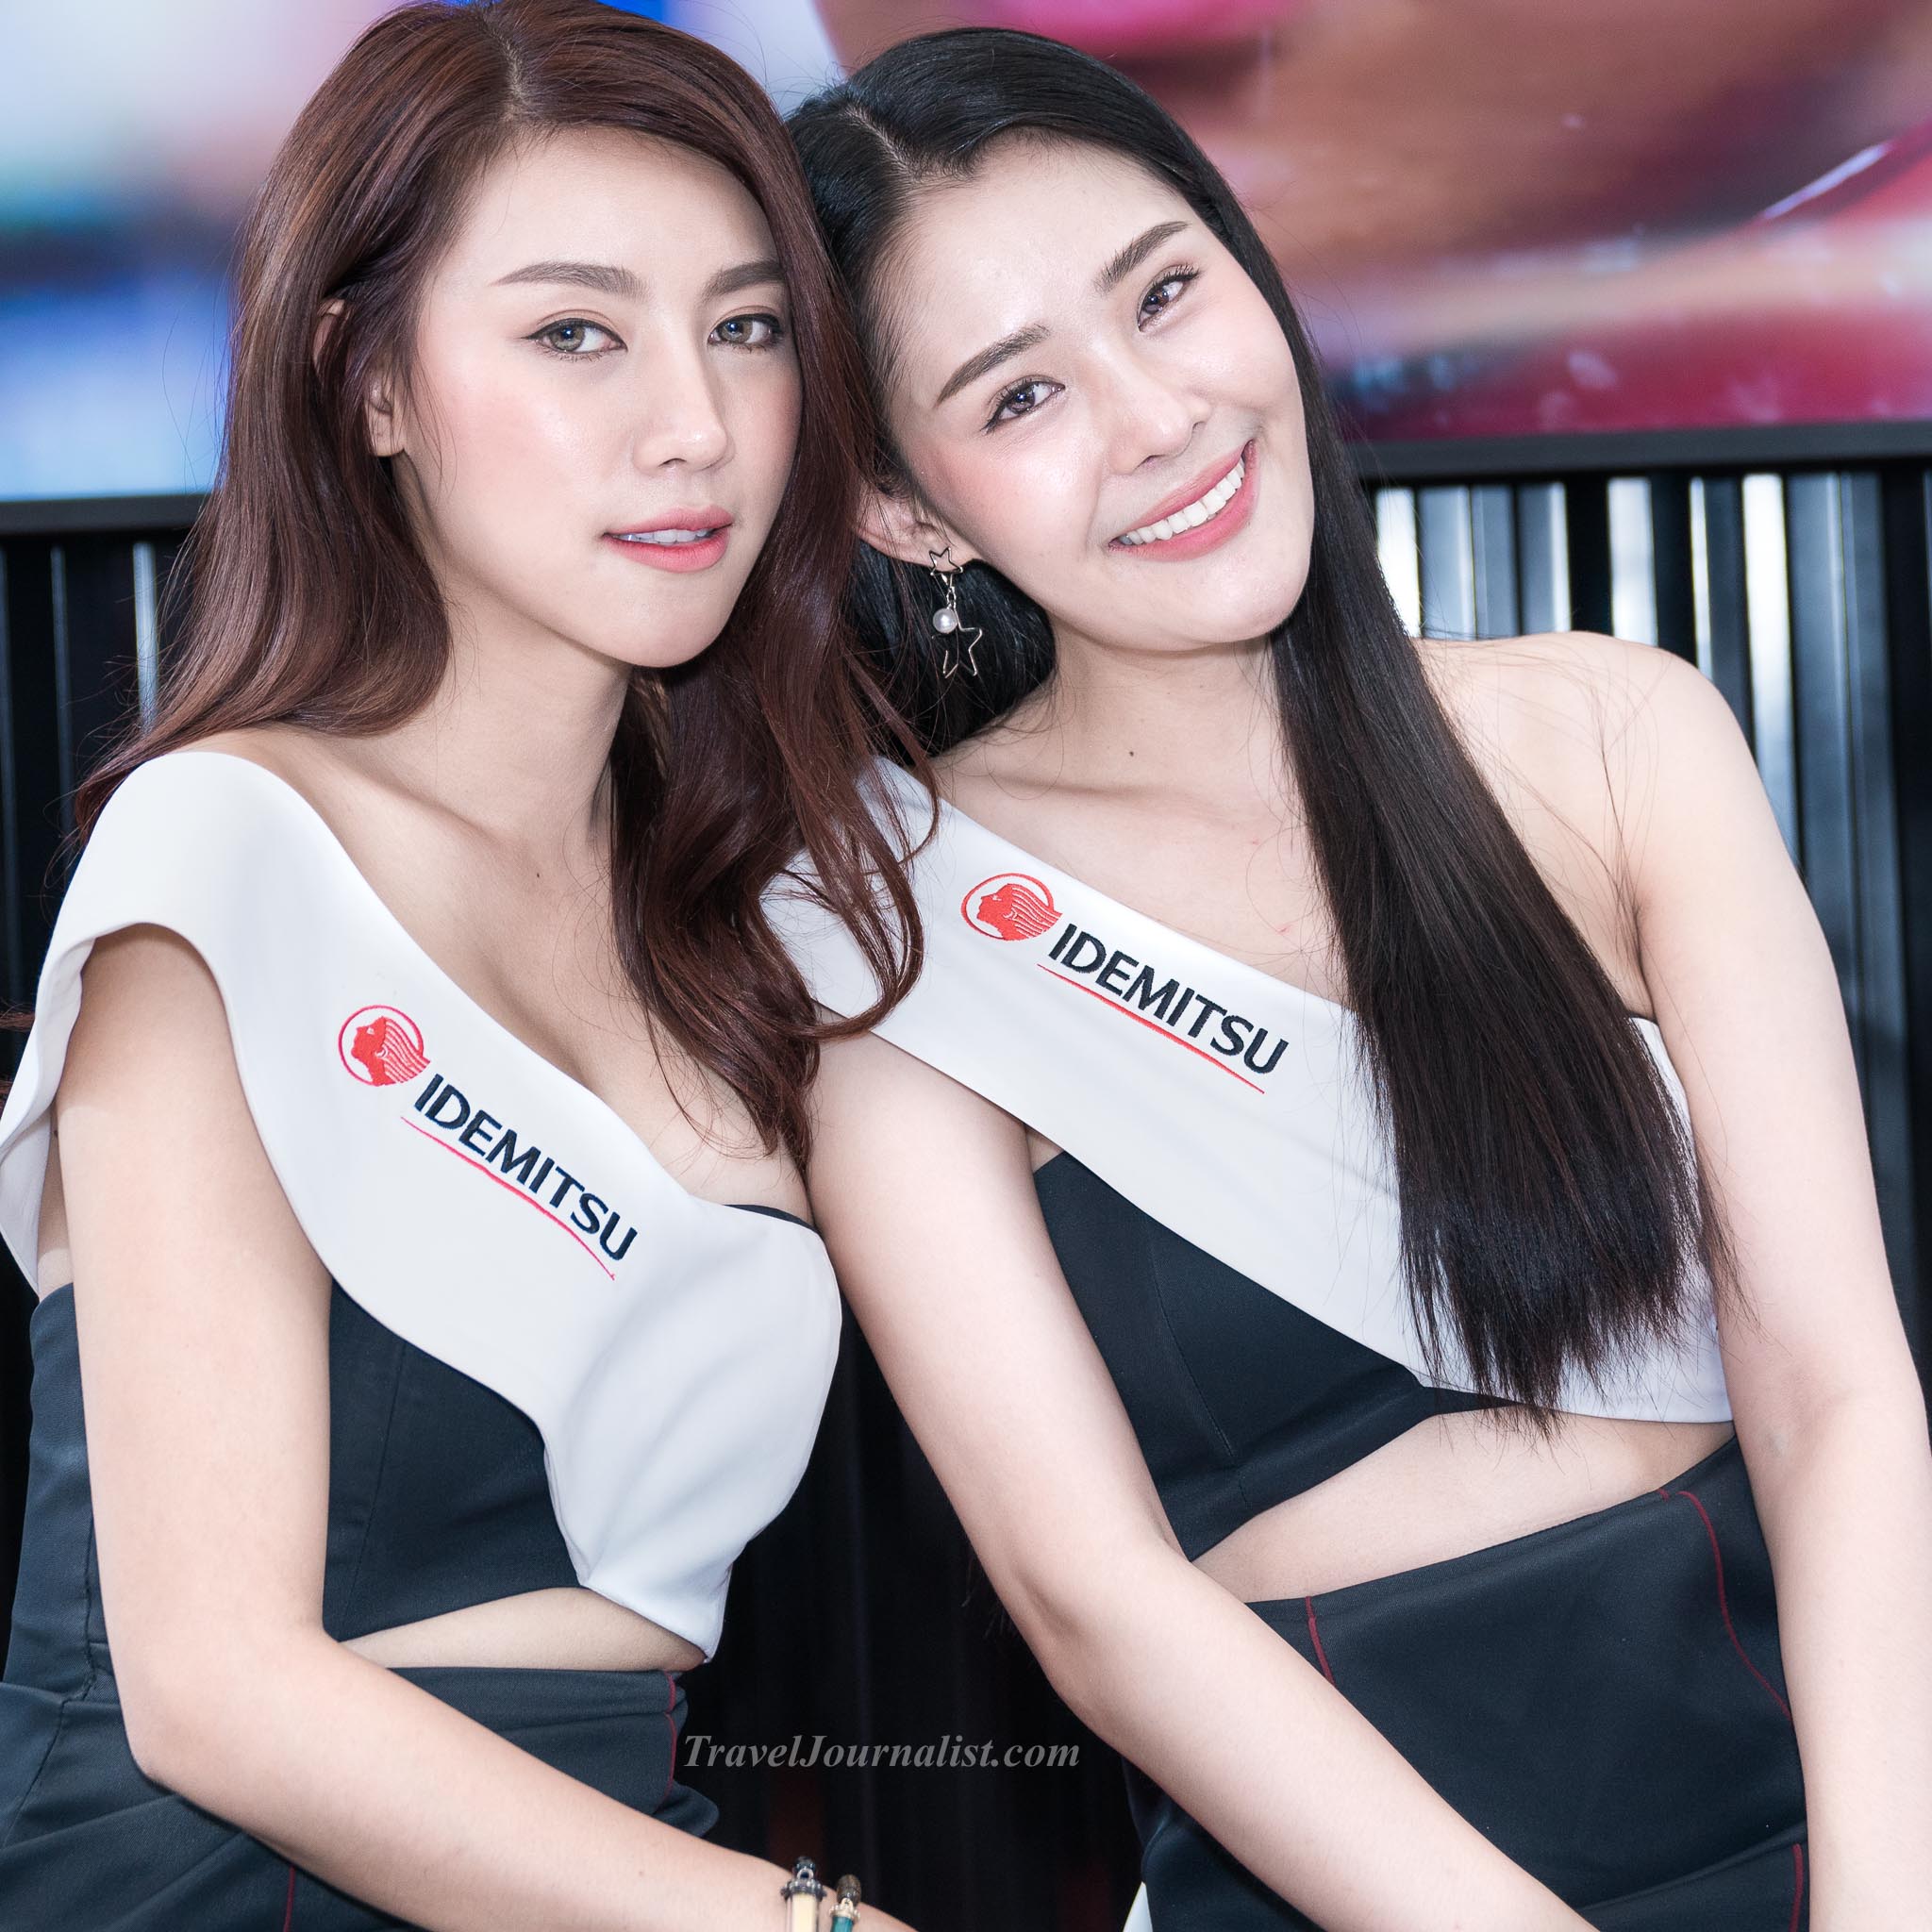 Thai girls and sex